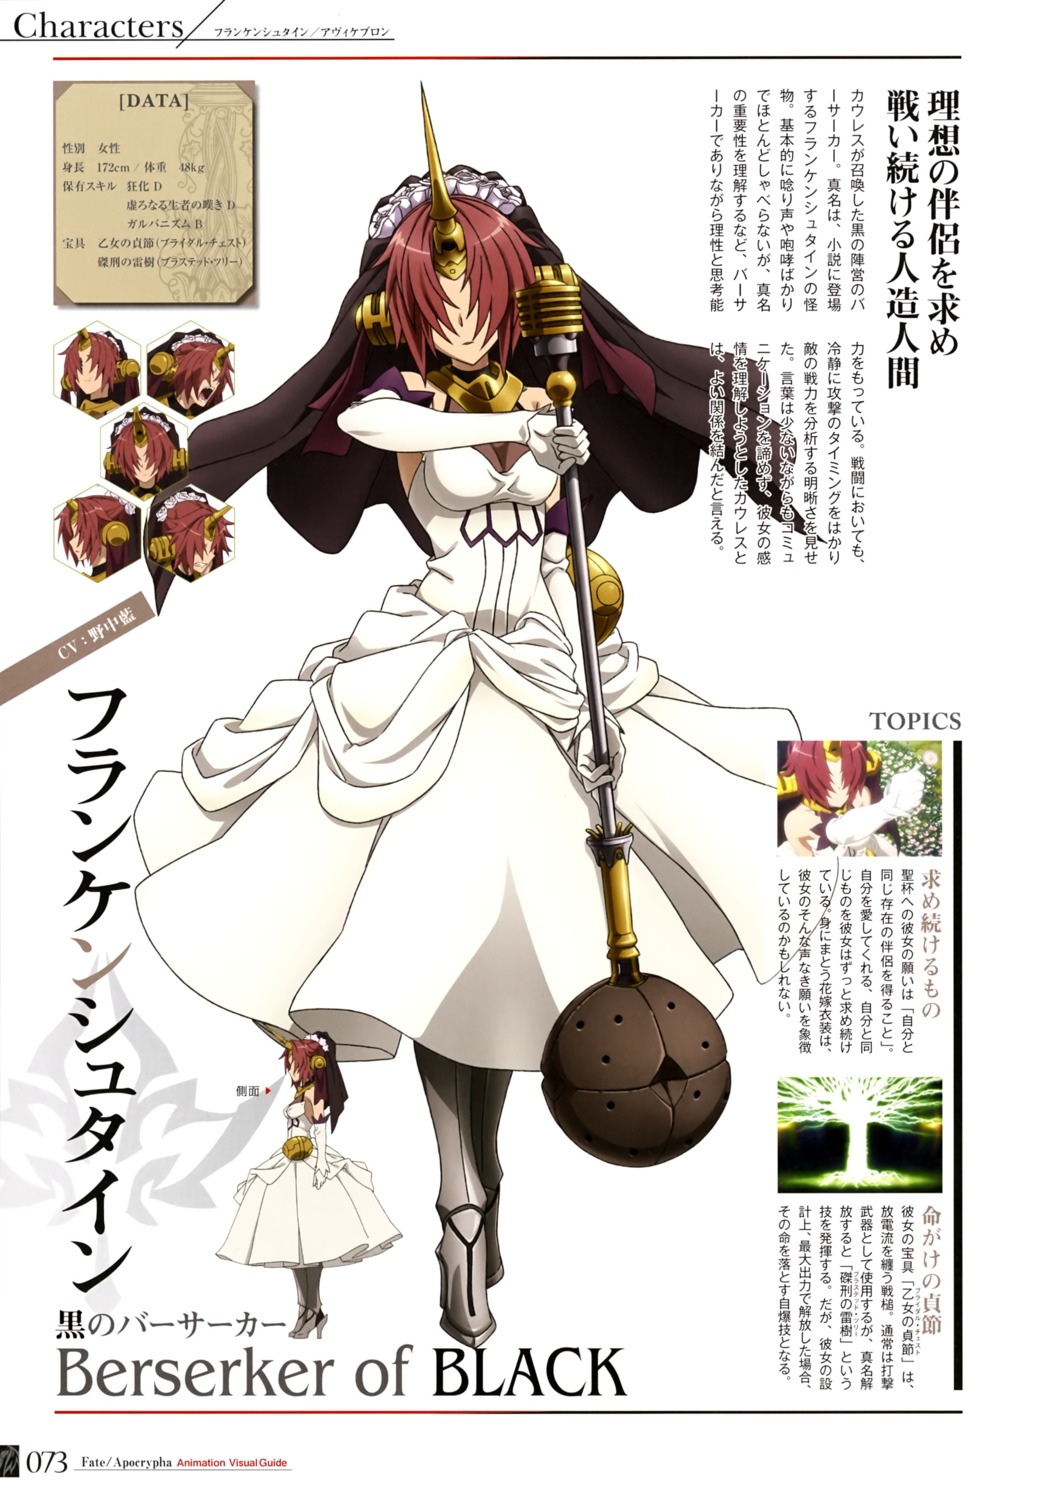 Fateapocrypha Fatestay Night Frankensteins Monster Fate Armor Character Design Dress 5614